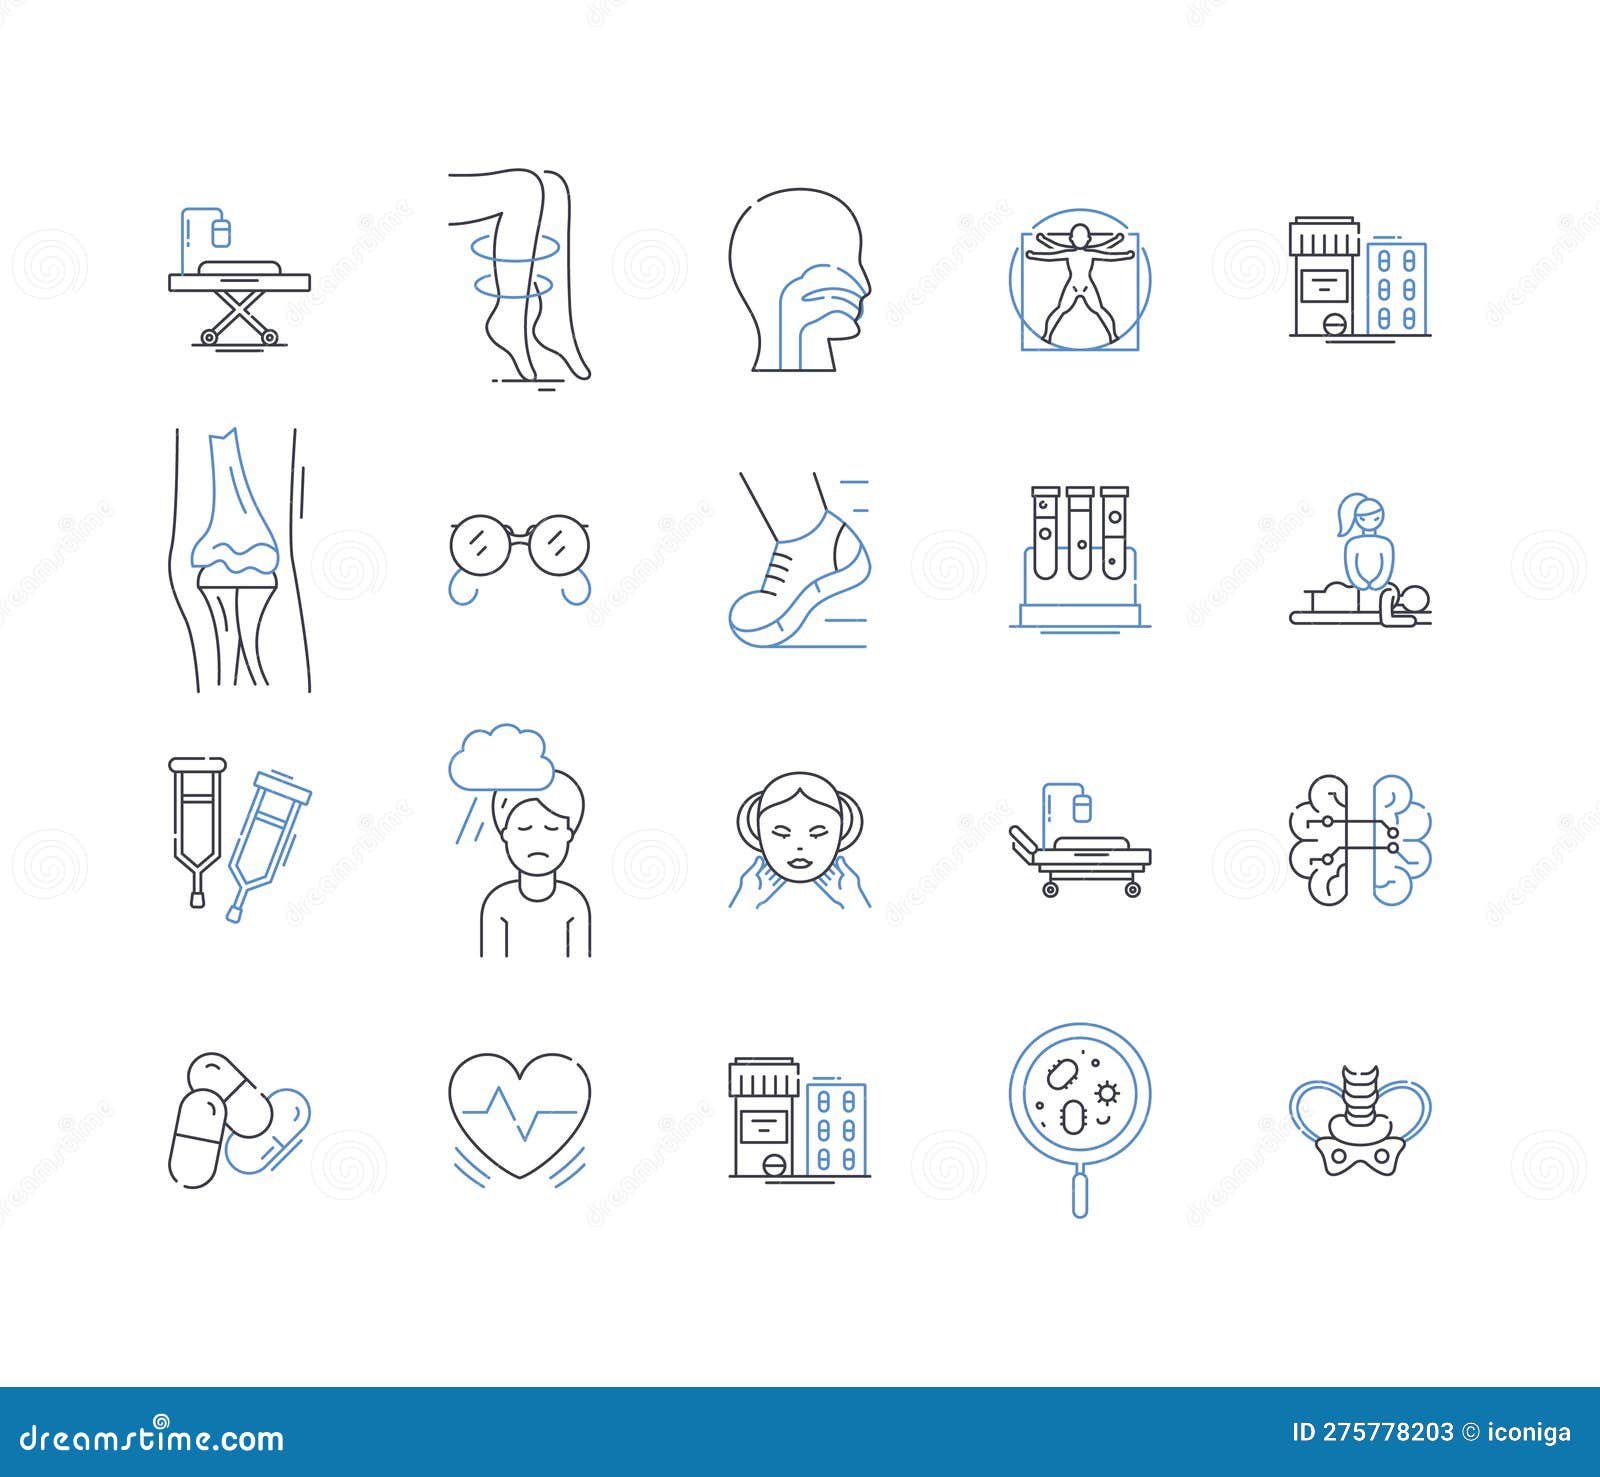 home healthcare line icons collection. elderly, homebound, healthcare, nursing, assistance, rehabilitation, therapy